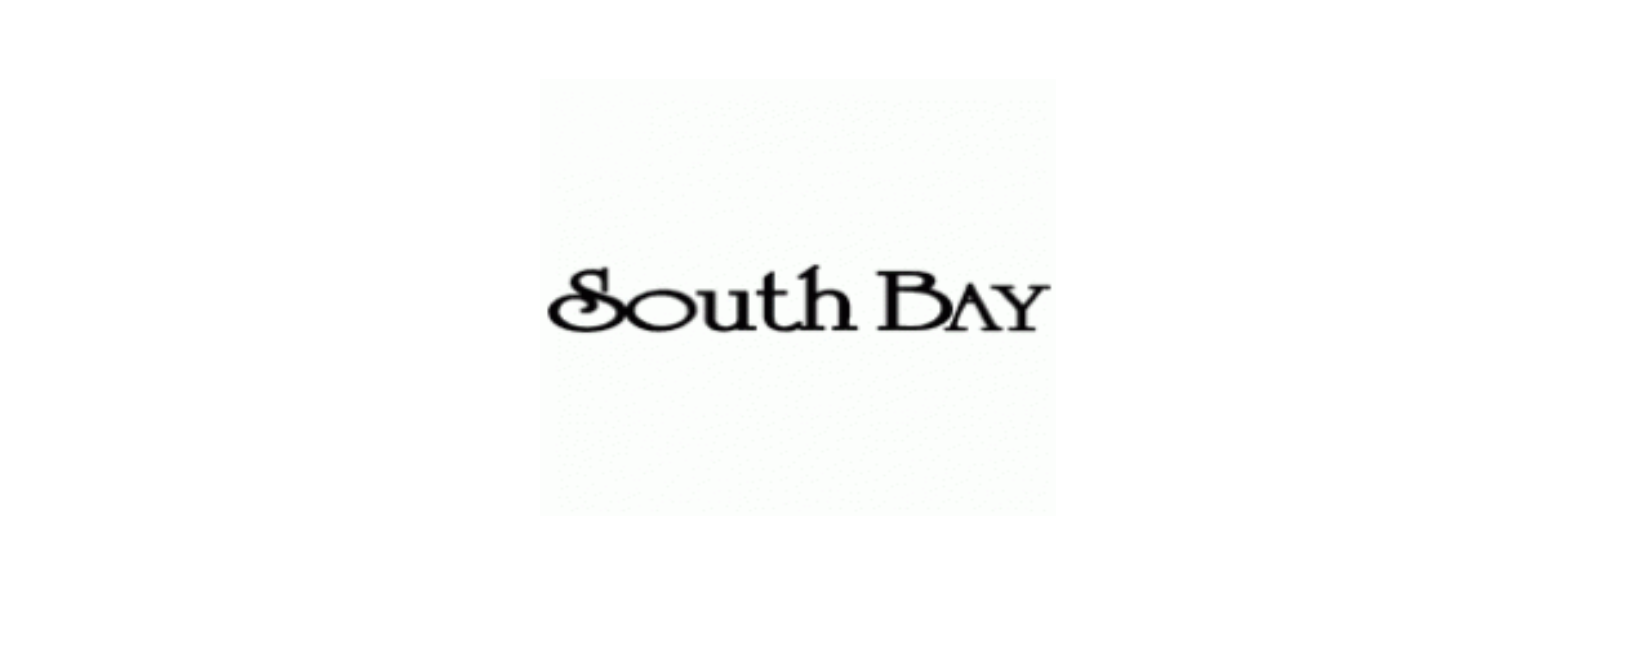 Southbay Discount Code 2022